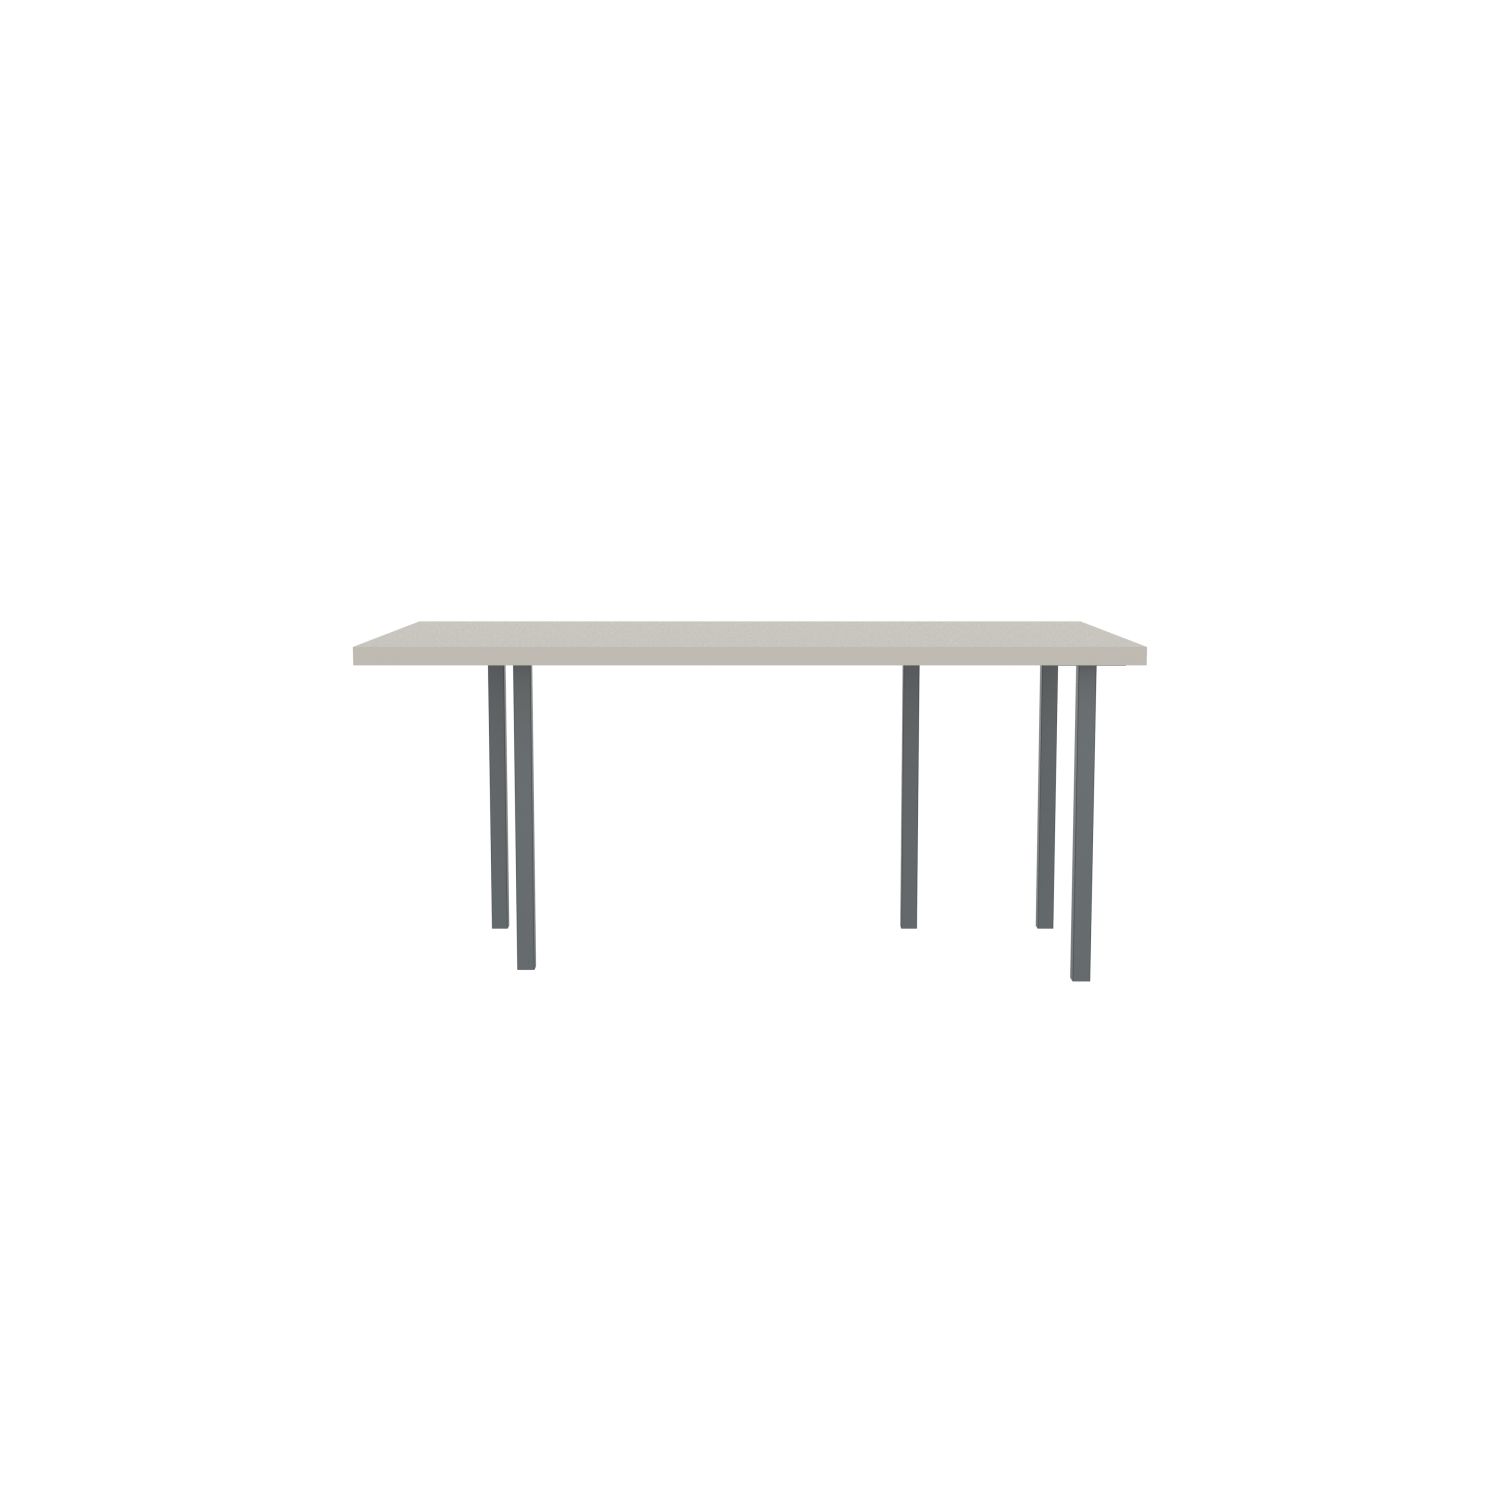 lensvelt bbrand table five fixed heigt 915x172 hpl white 50 mm price level 1 dark grey ral7011